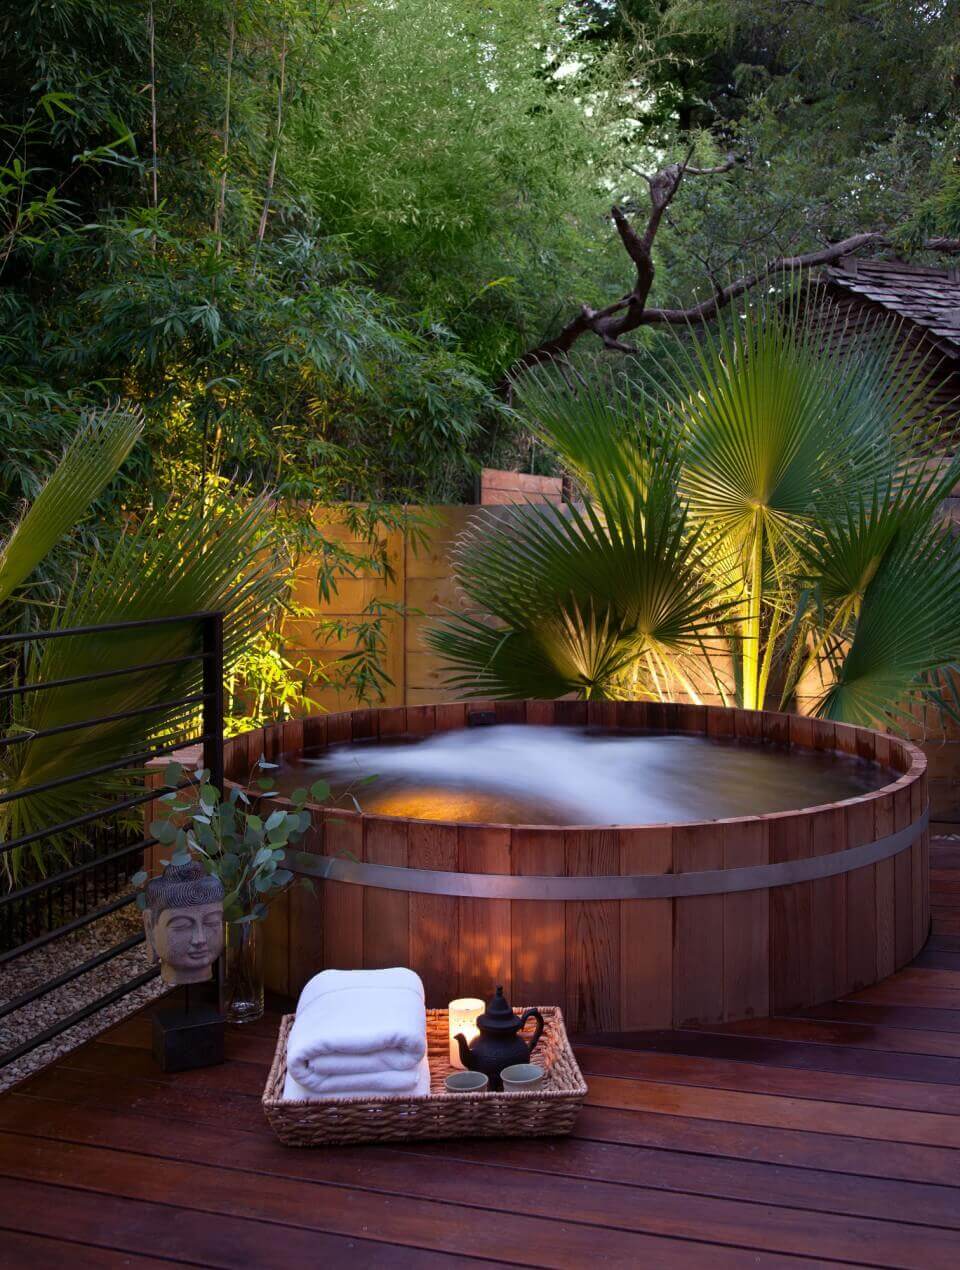 You can combine your favourite outdoor spas and hot tubs into your private relaxing area and your garden and create a little secret haven just outside your place.